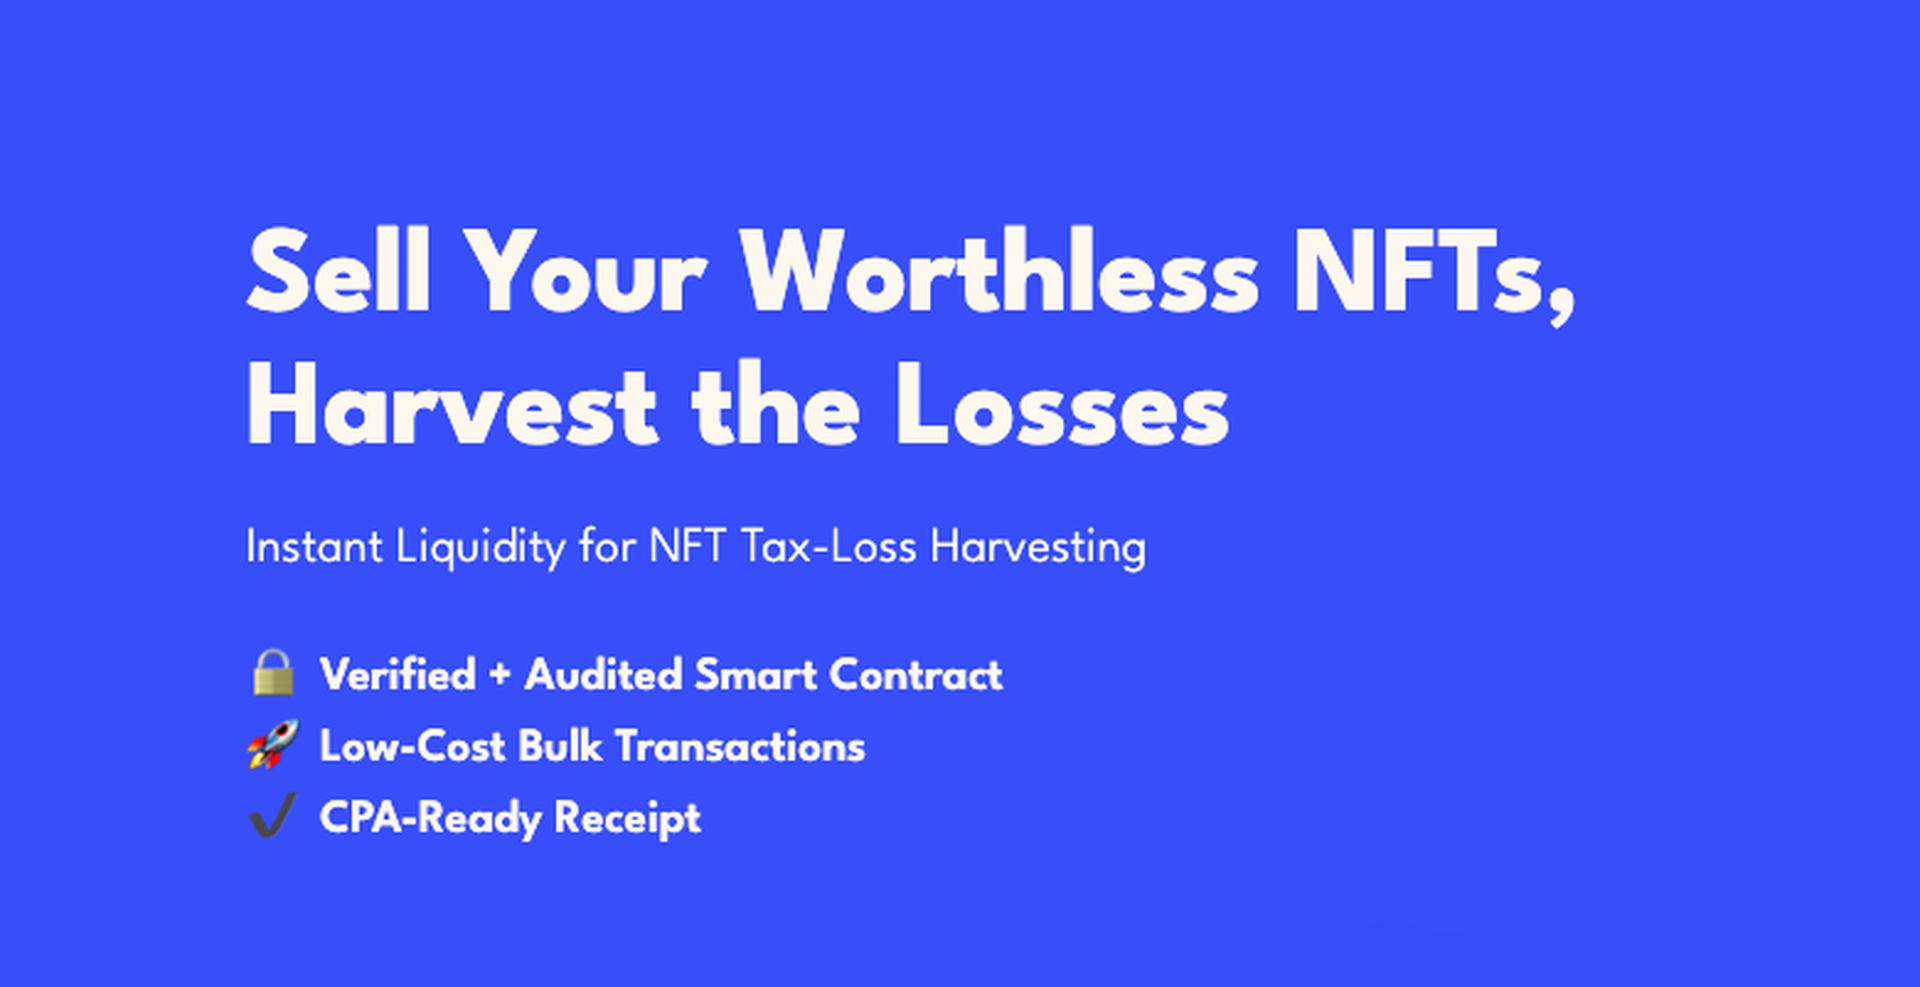 Investors who purchased NFTs that are currently practically worthless may now get tax write-offs thanks to a new business called Unsellable NFT, which offers...